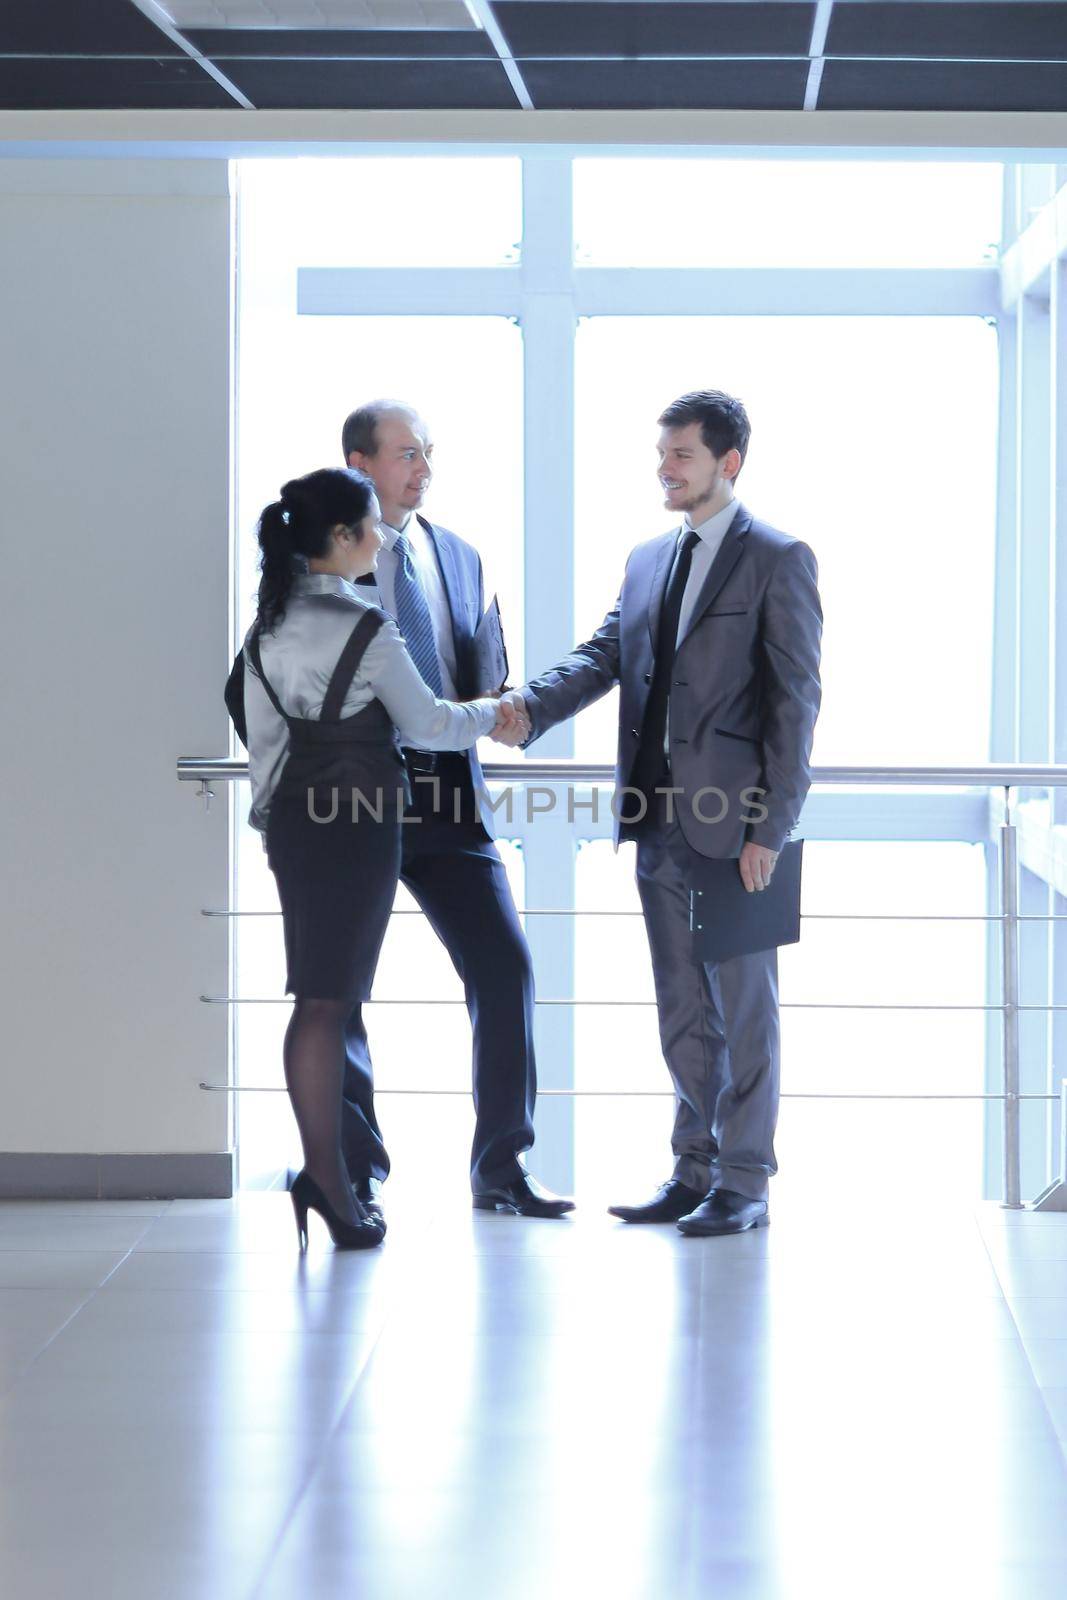 Manager welcomes the client in the lobby office.photo with copy space